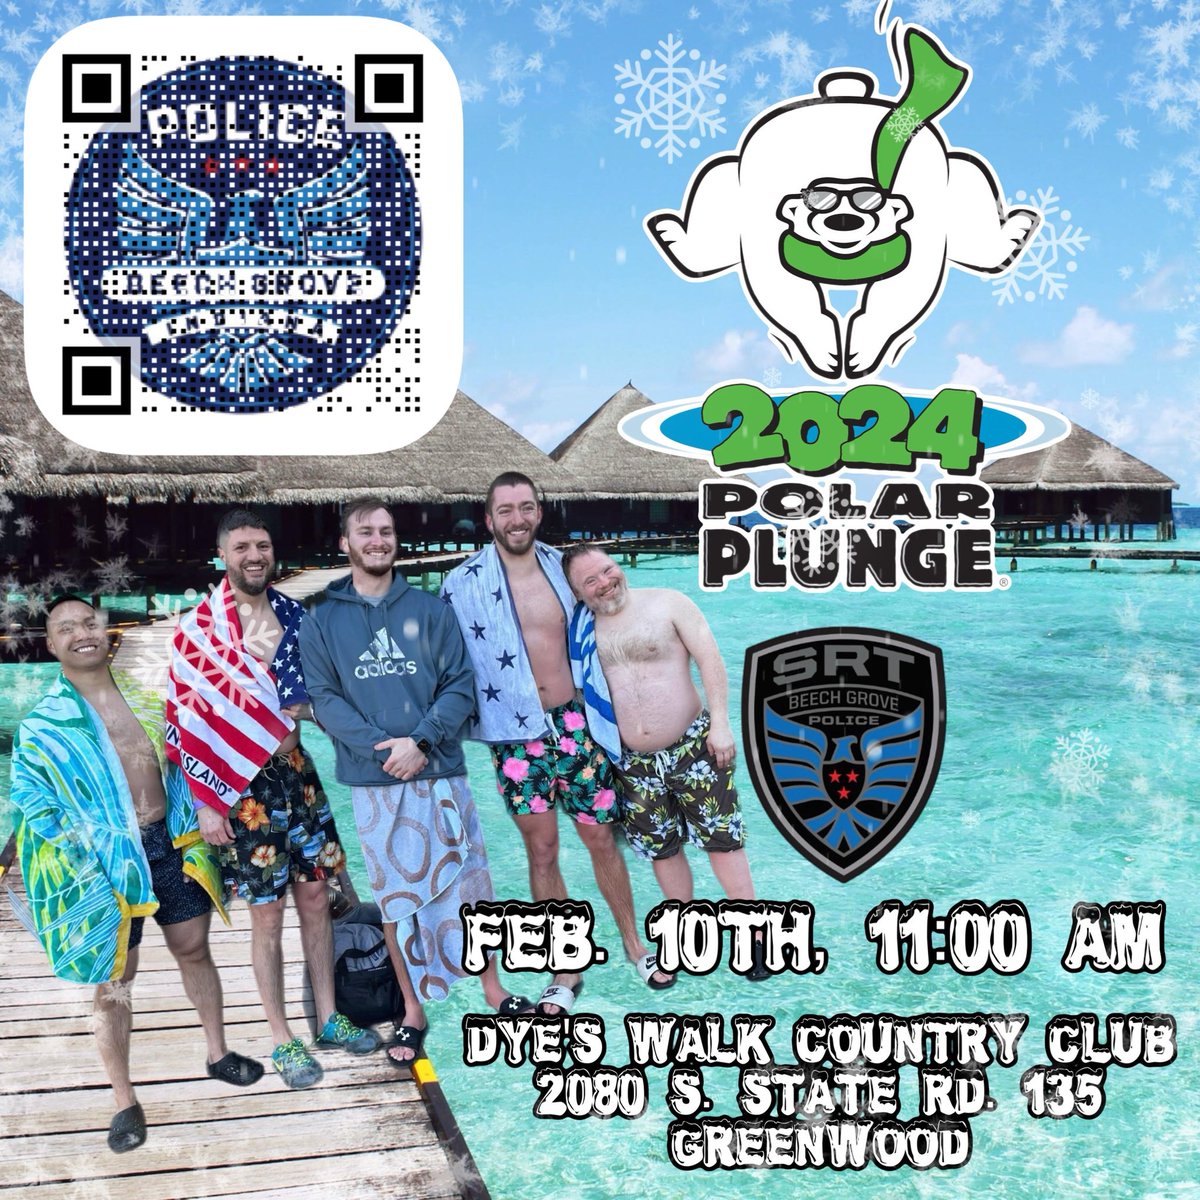 Several BGPD Officers and SRT members are jumping in the Polar Plunge 🧊 🏊‍♂️ 2024 for Special Olympics Indiana! We’ve already cracked $1,000 in fundraising and are hoping to raise more! If interested, consider donating via the QR code. #polarplunge #specialolympics